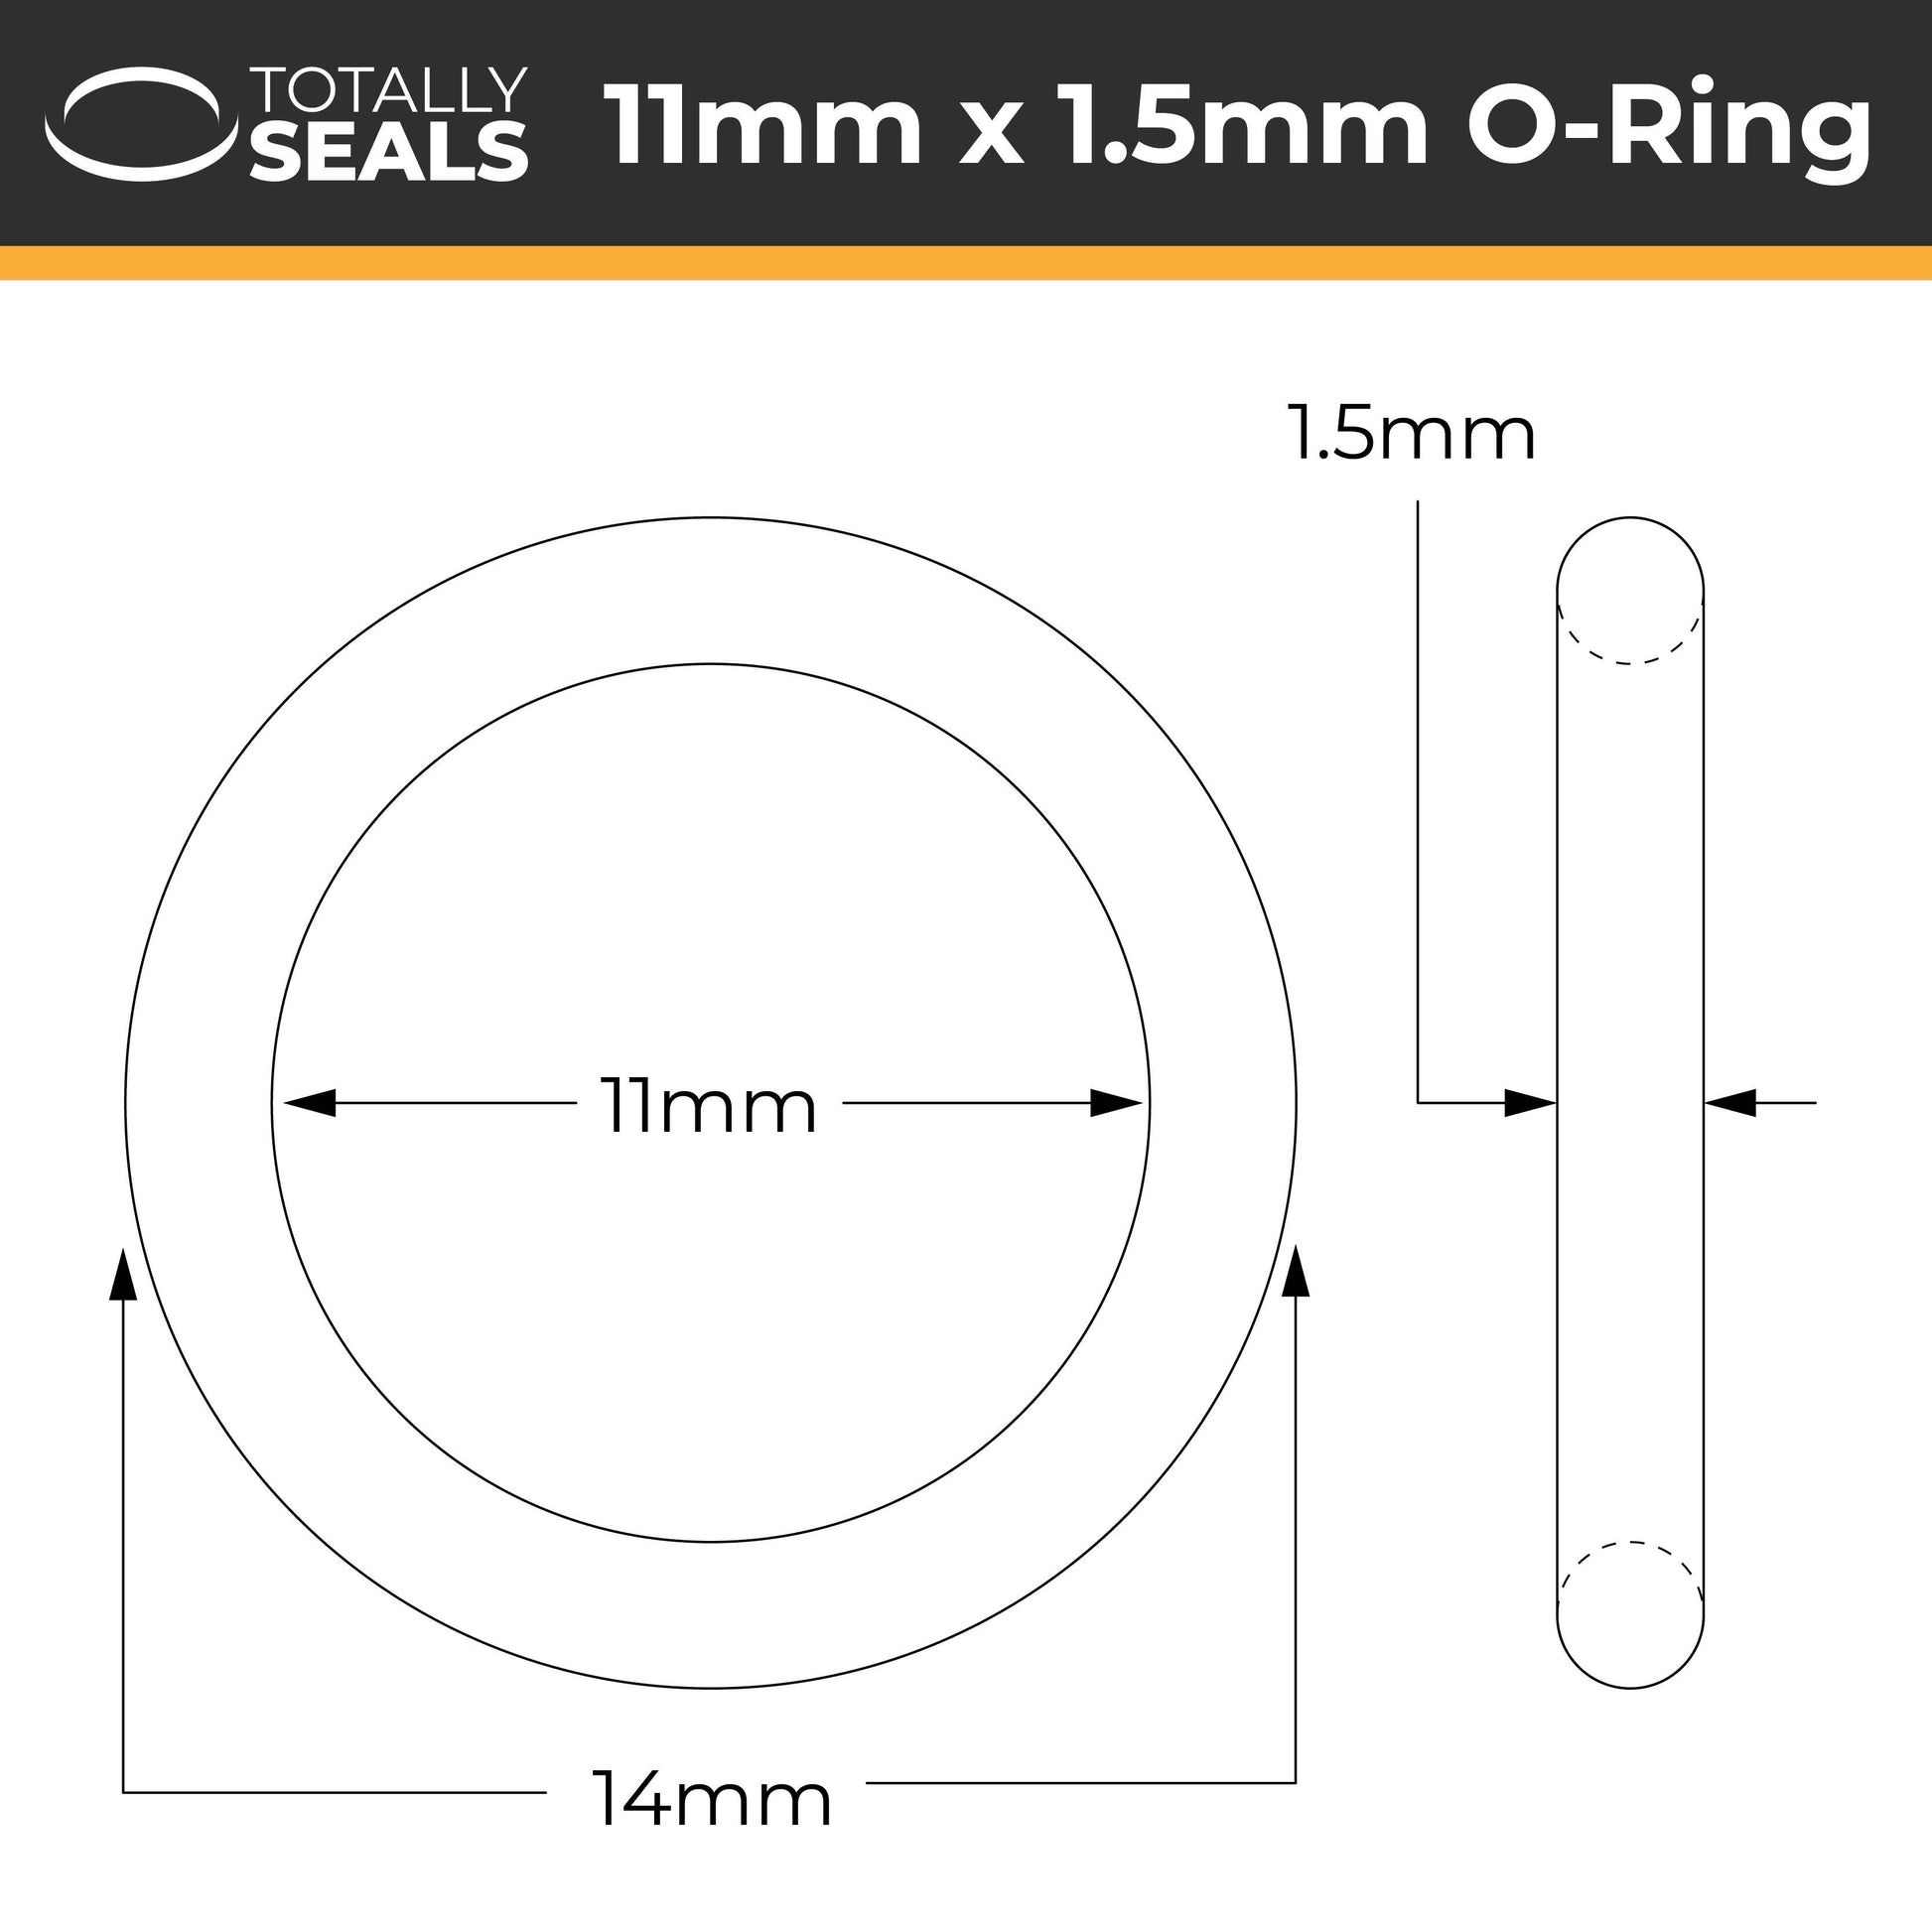 11mm x 1.5mm (14mm OD) Nitrile O-Rings - Totally Seals®